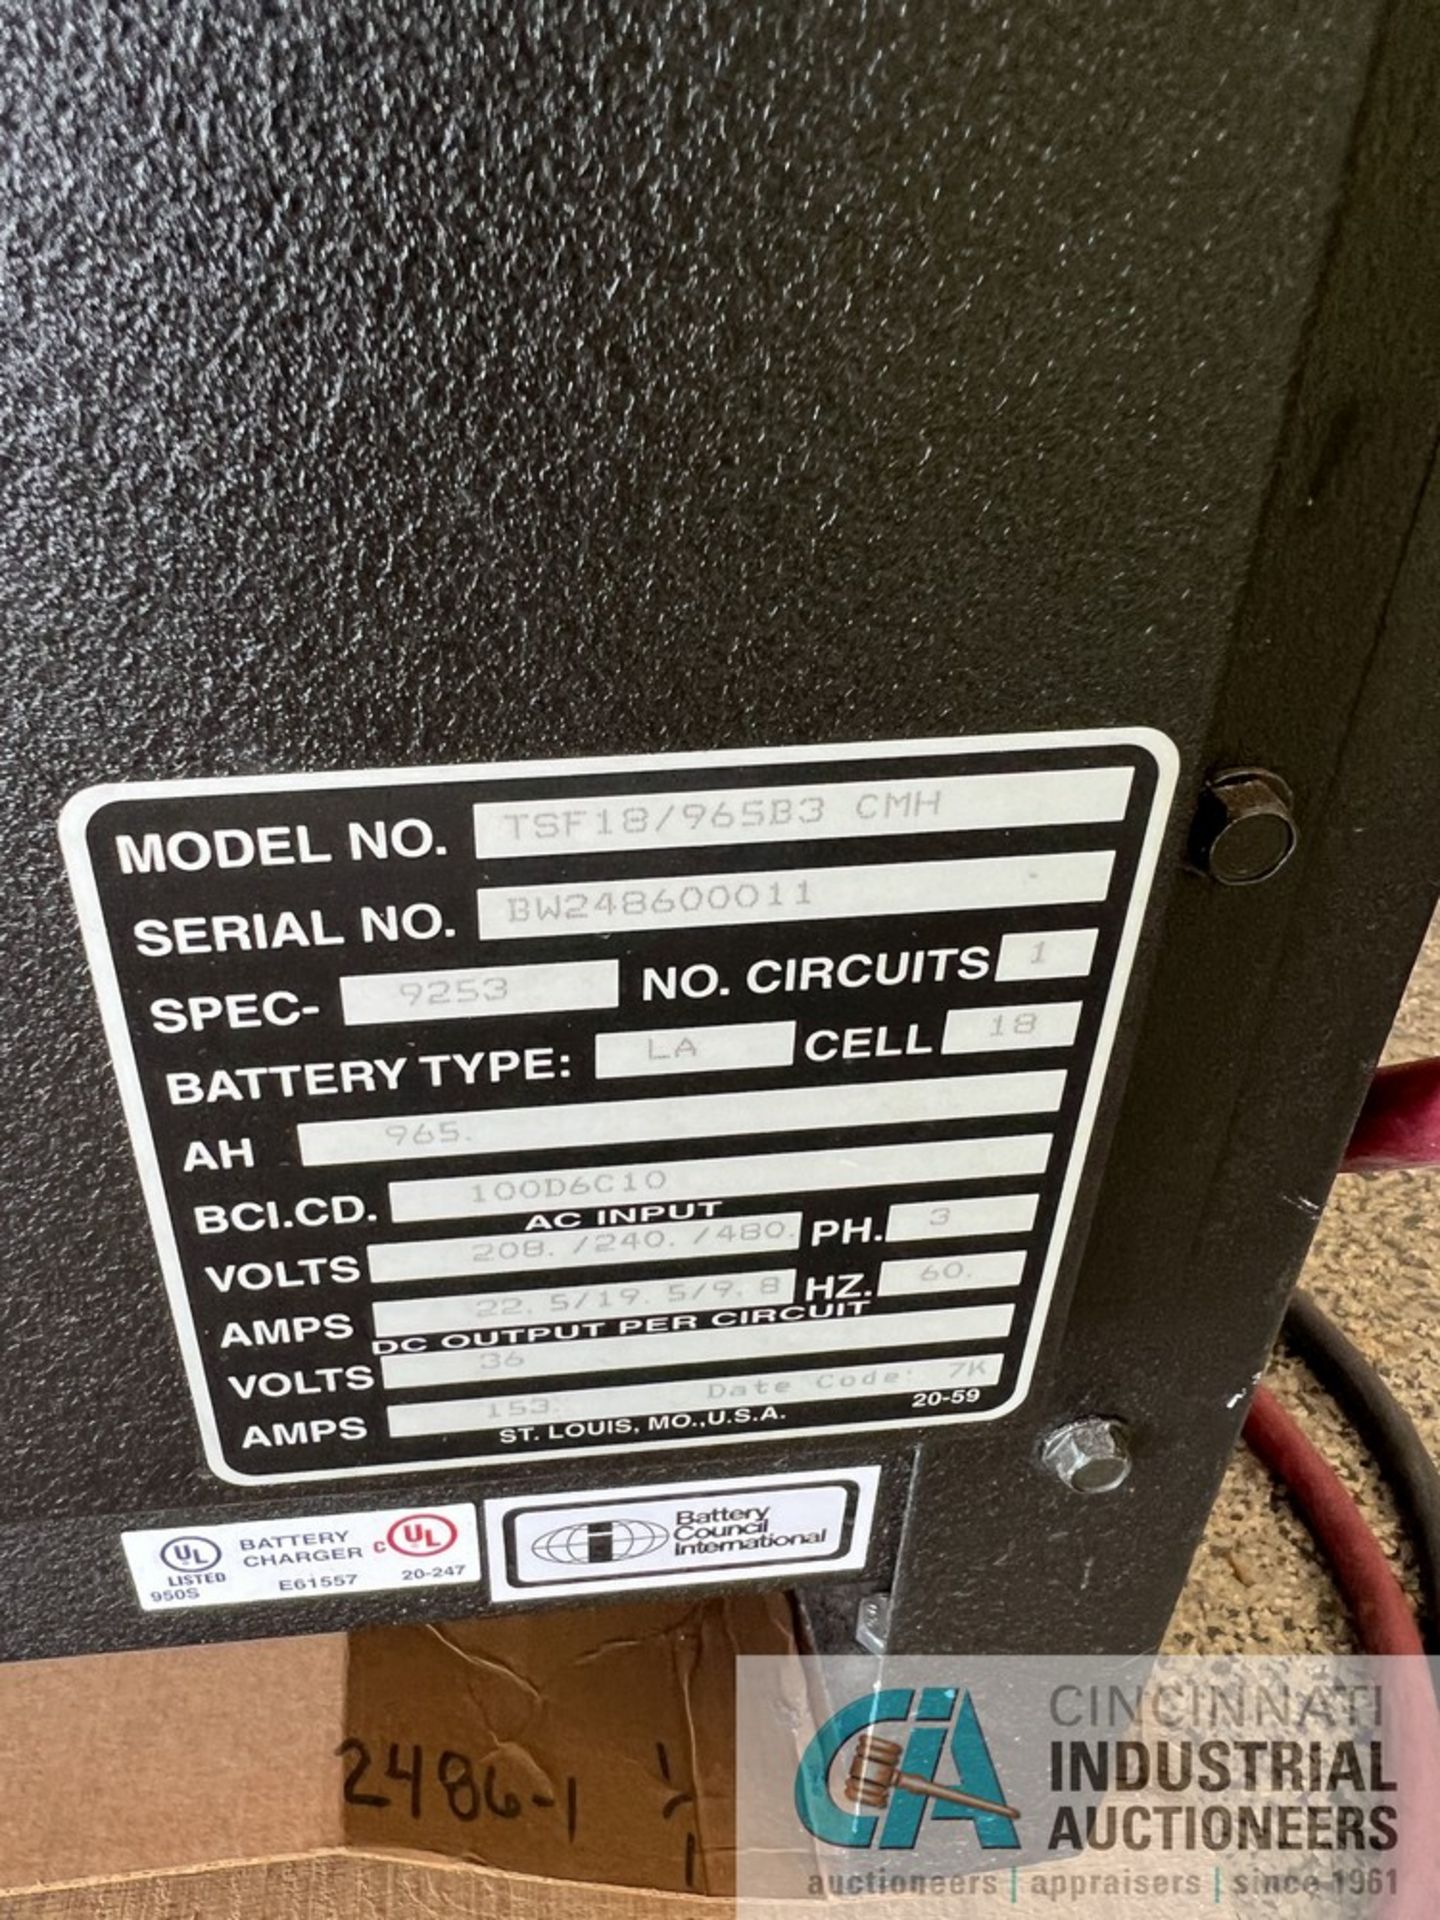 36 VOLT TOTALIFT MODEL TSF18/965B3 CMH BATTERY CHARGER; S/N BW248600011 (SHIP) - Image 2 of 2